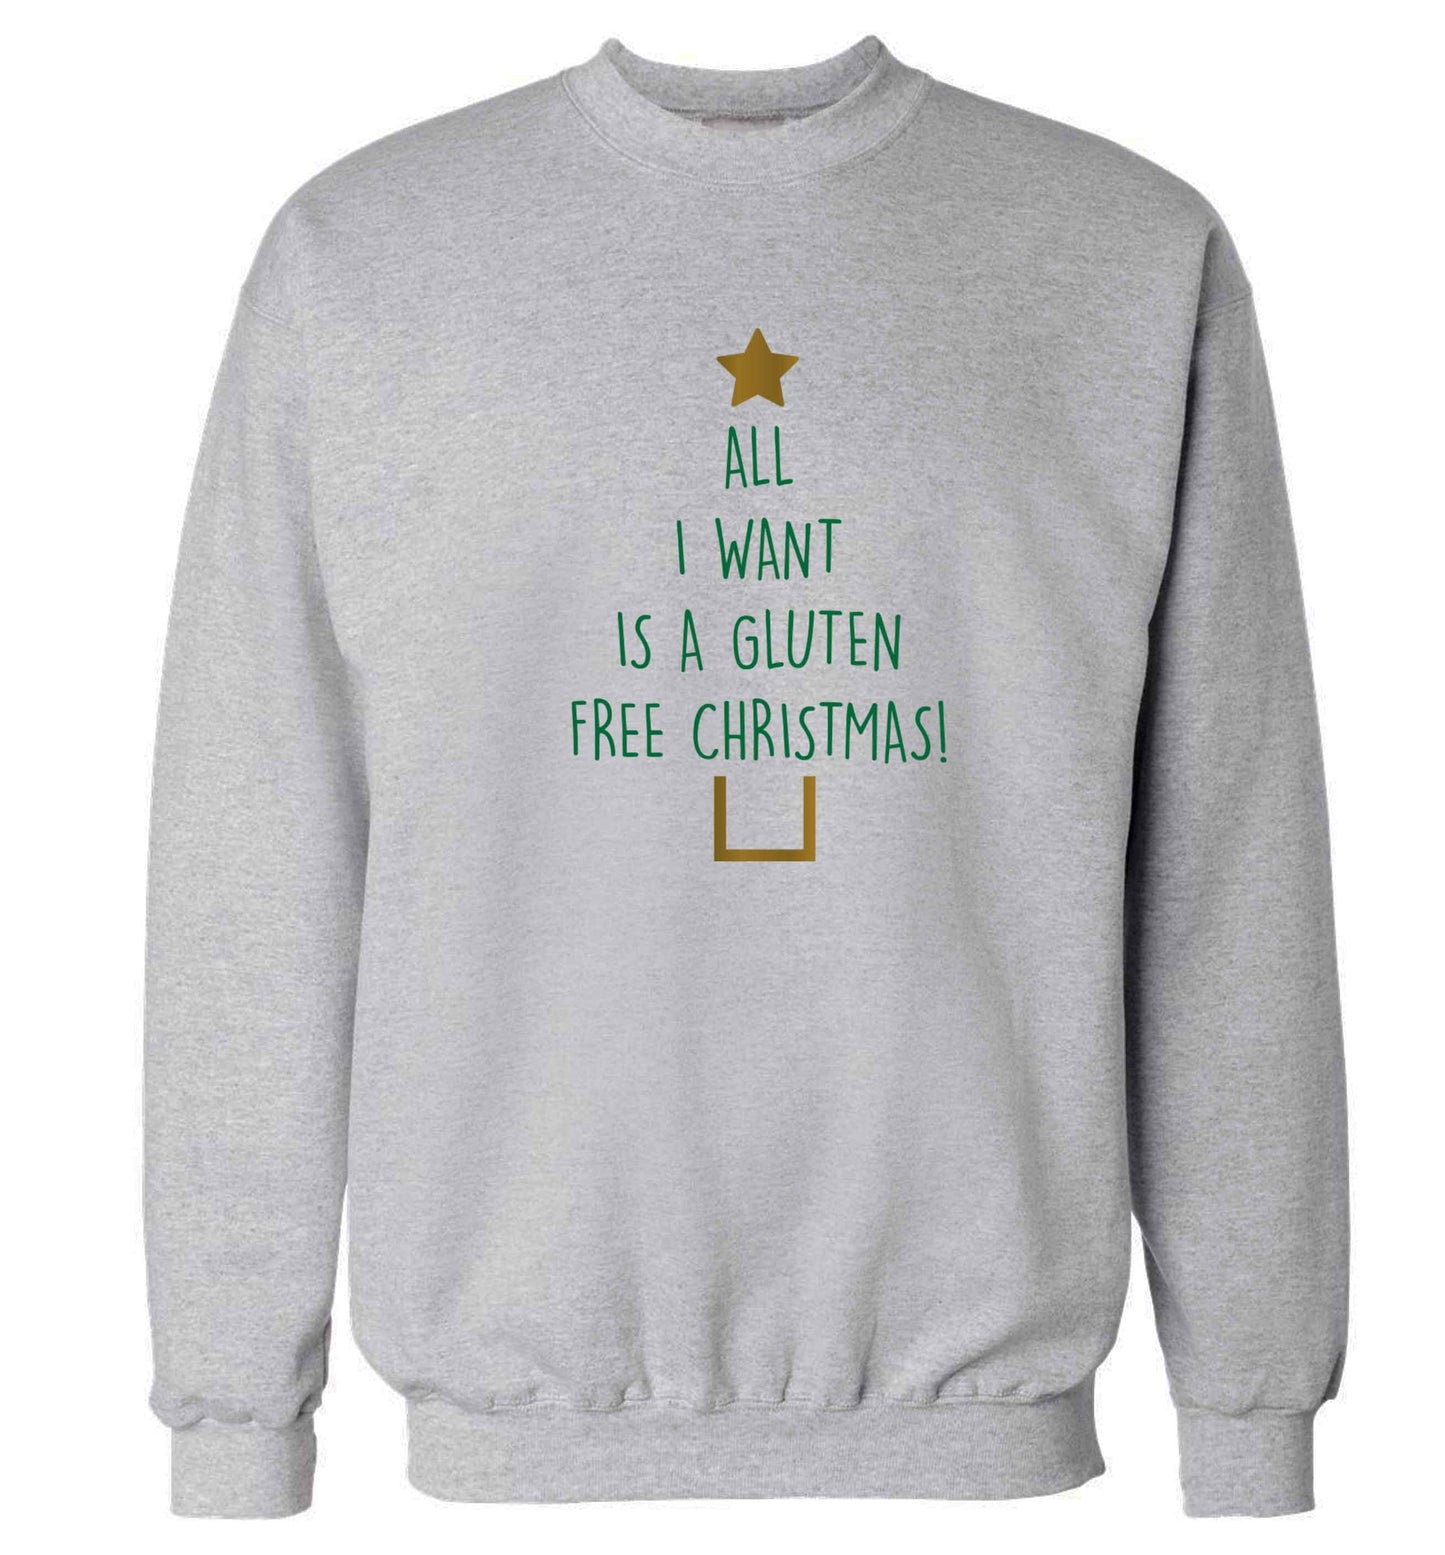 All I want is a gluten free Christmas Adult's unisex grey Sweater 2XL